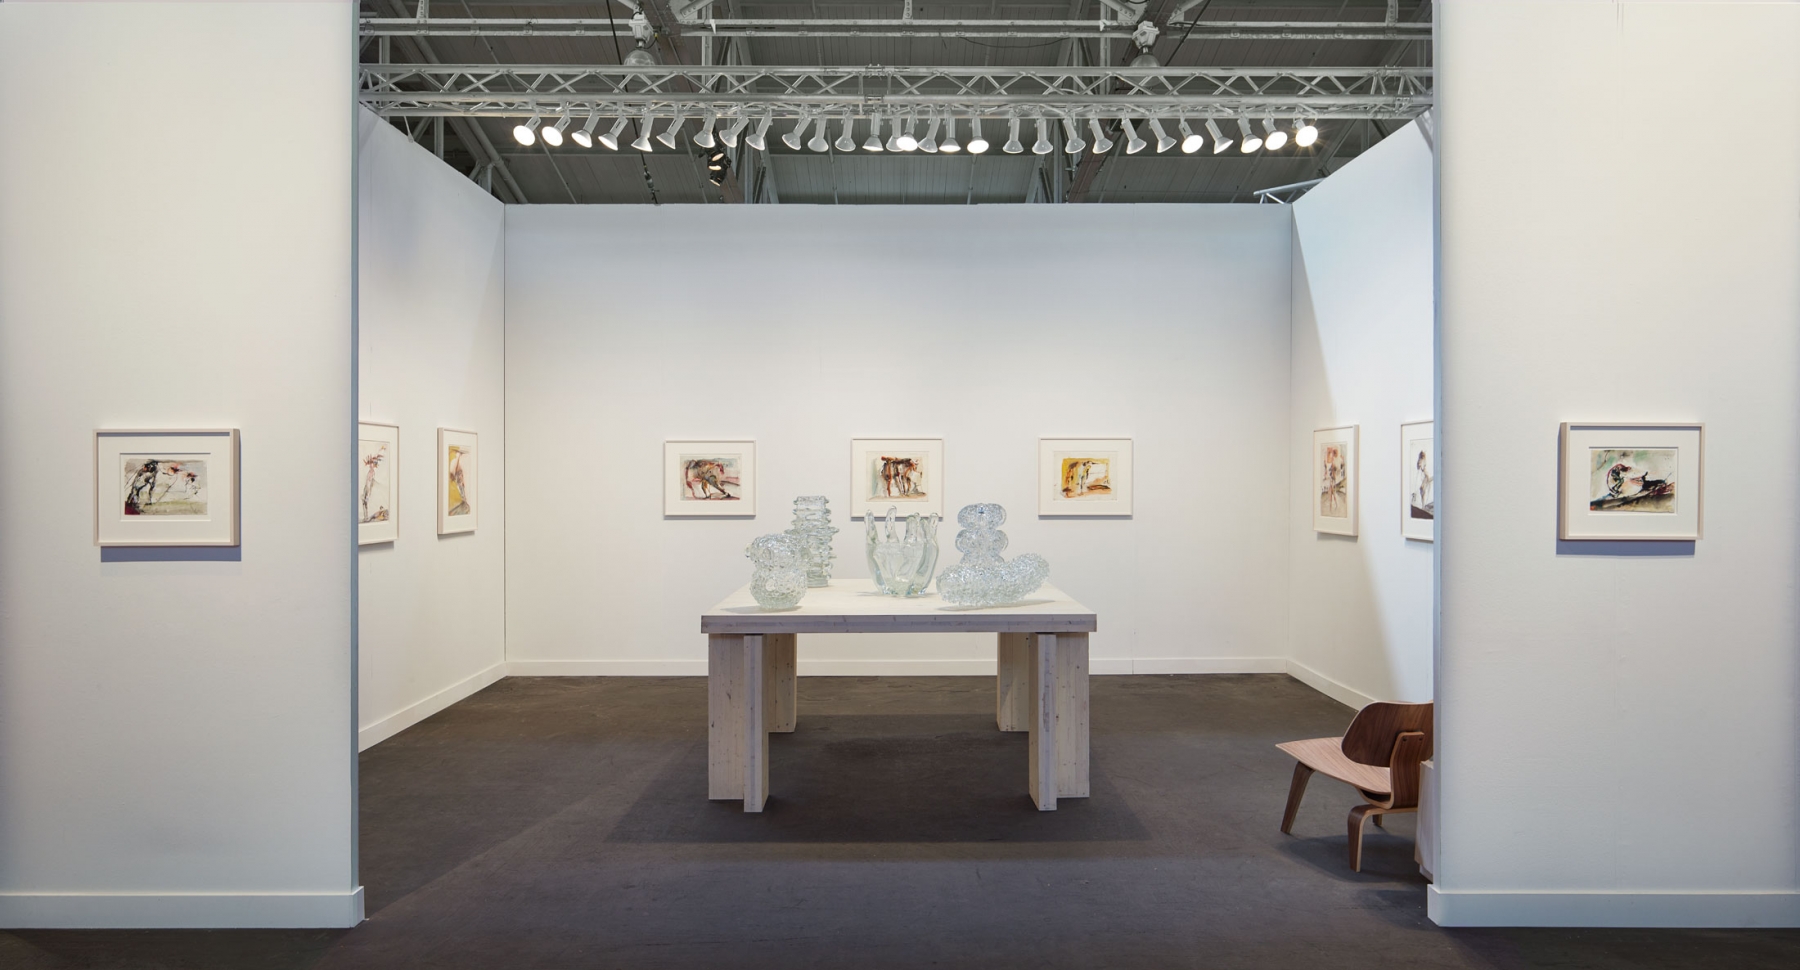 Luhring Augustine

FOG Design+Art, Booth 207

Installation view

2020